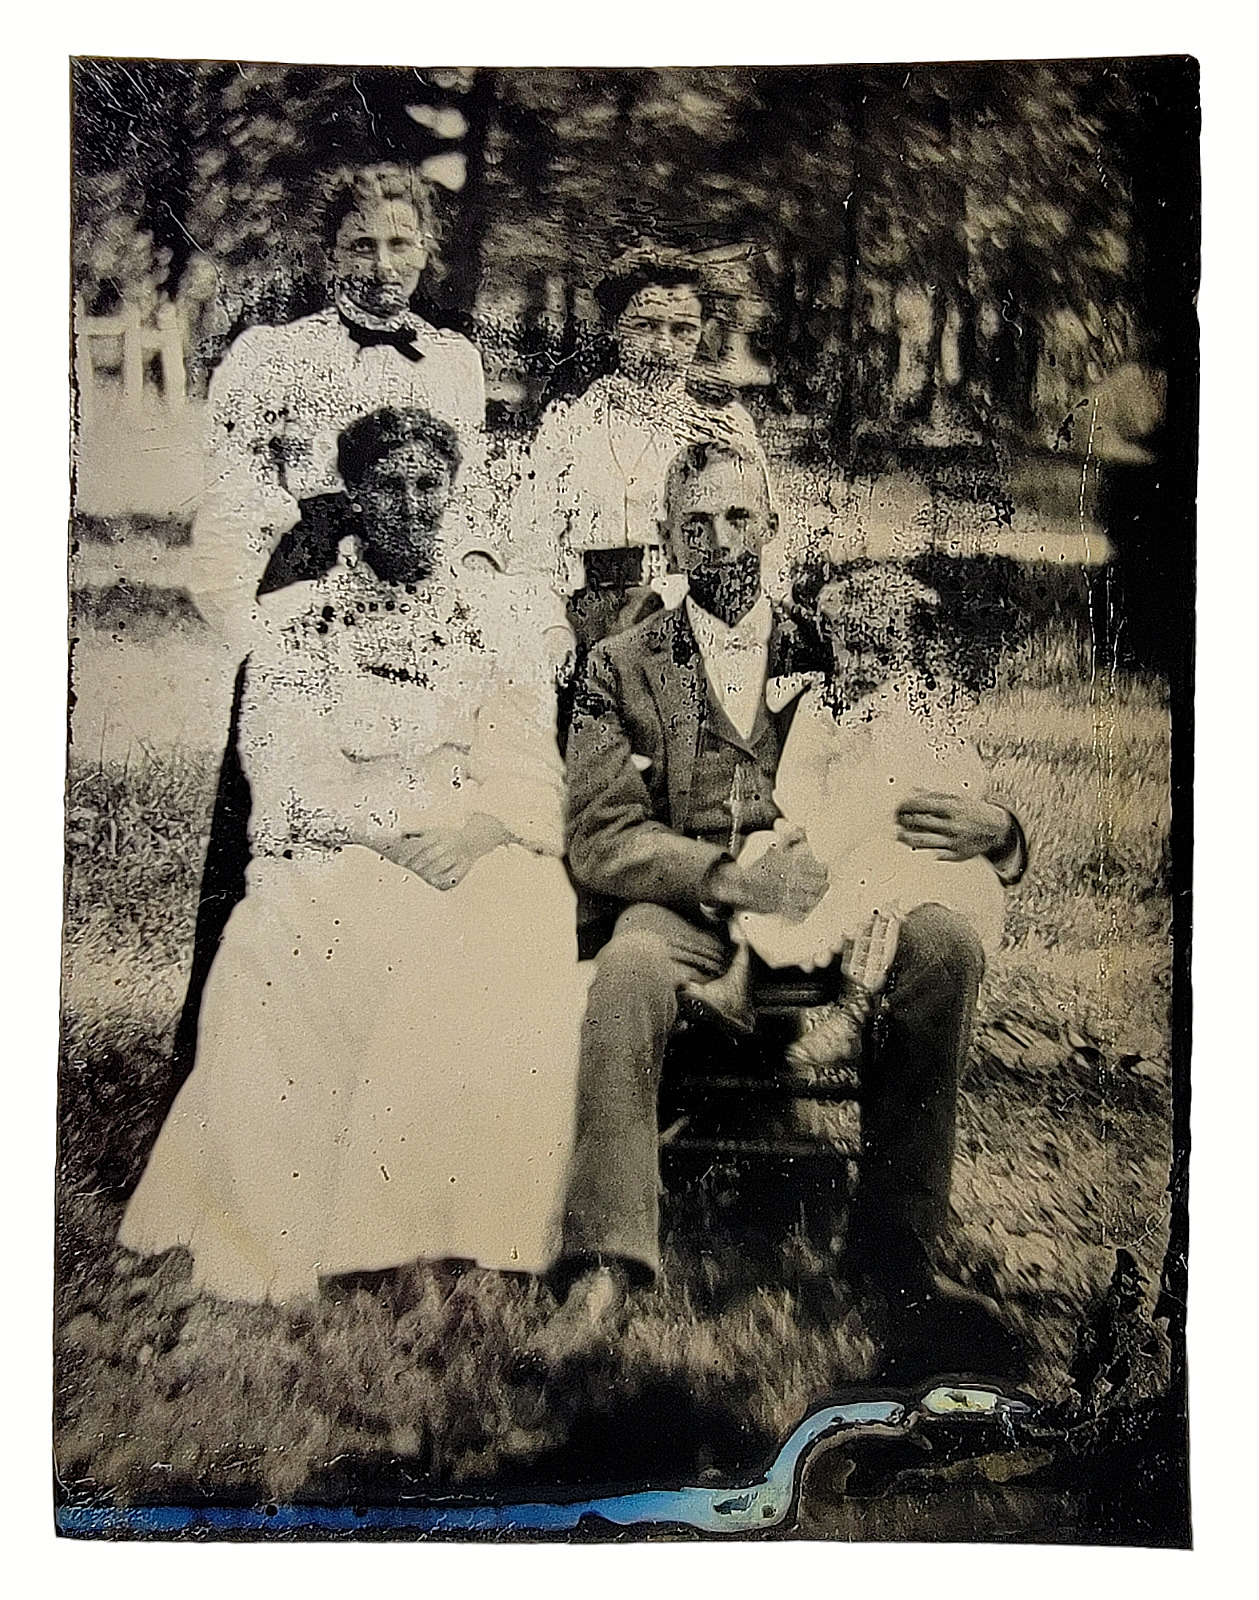 Original Old Vintage Antique Tintype Photo Picture Family People Nature B&W